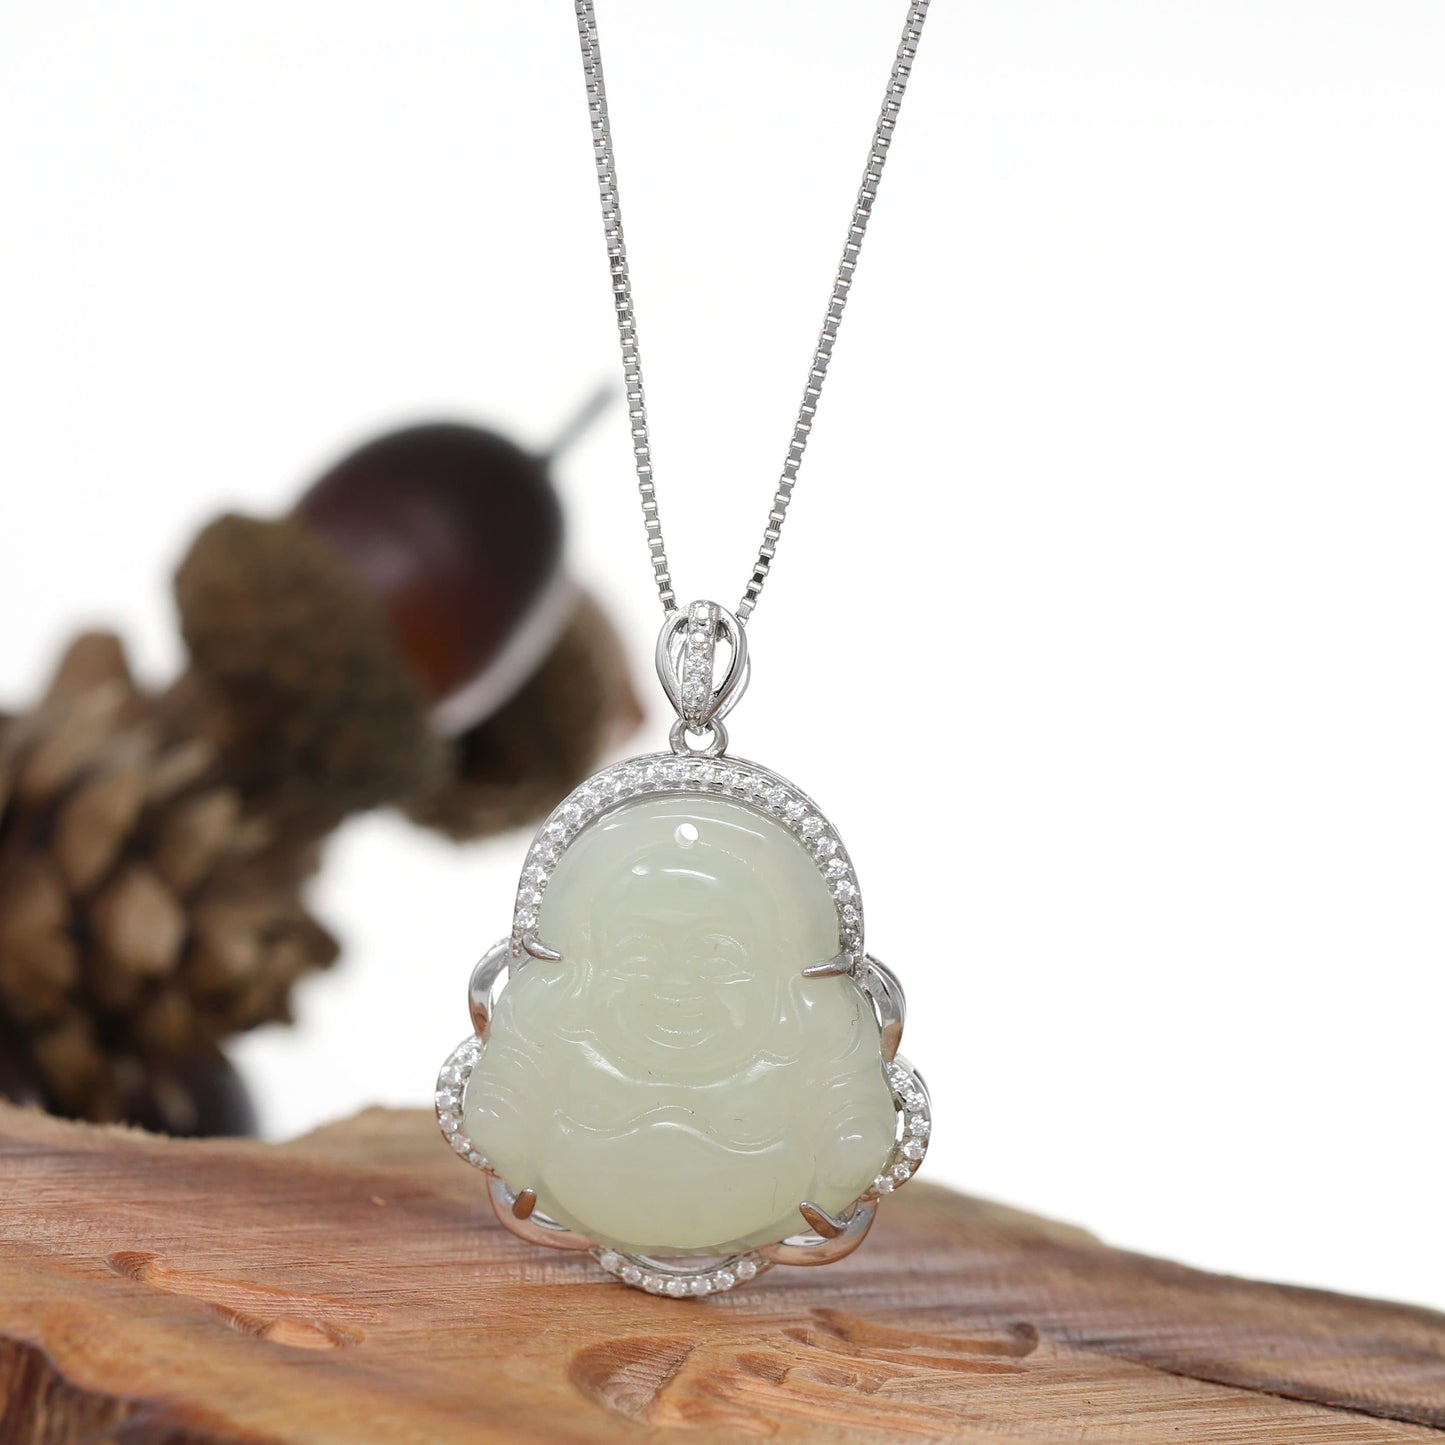 Luxury Smiling Retro Real Jade Buddha Necklace Pendant with Gold Chain  Jewelry | eBay